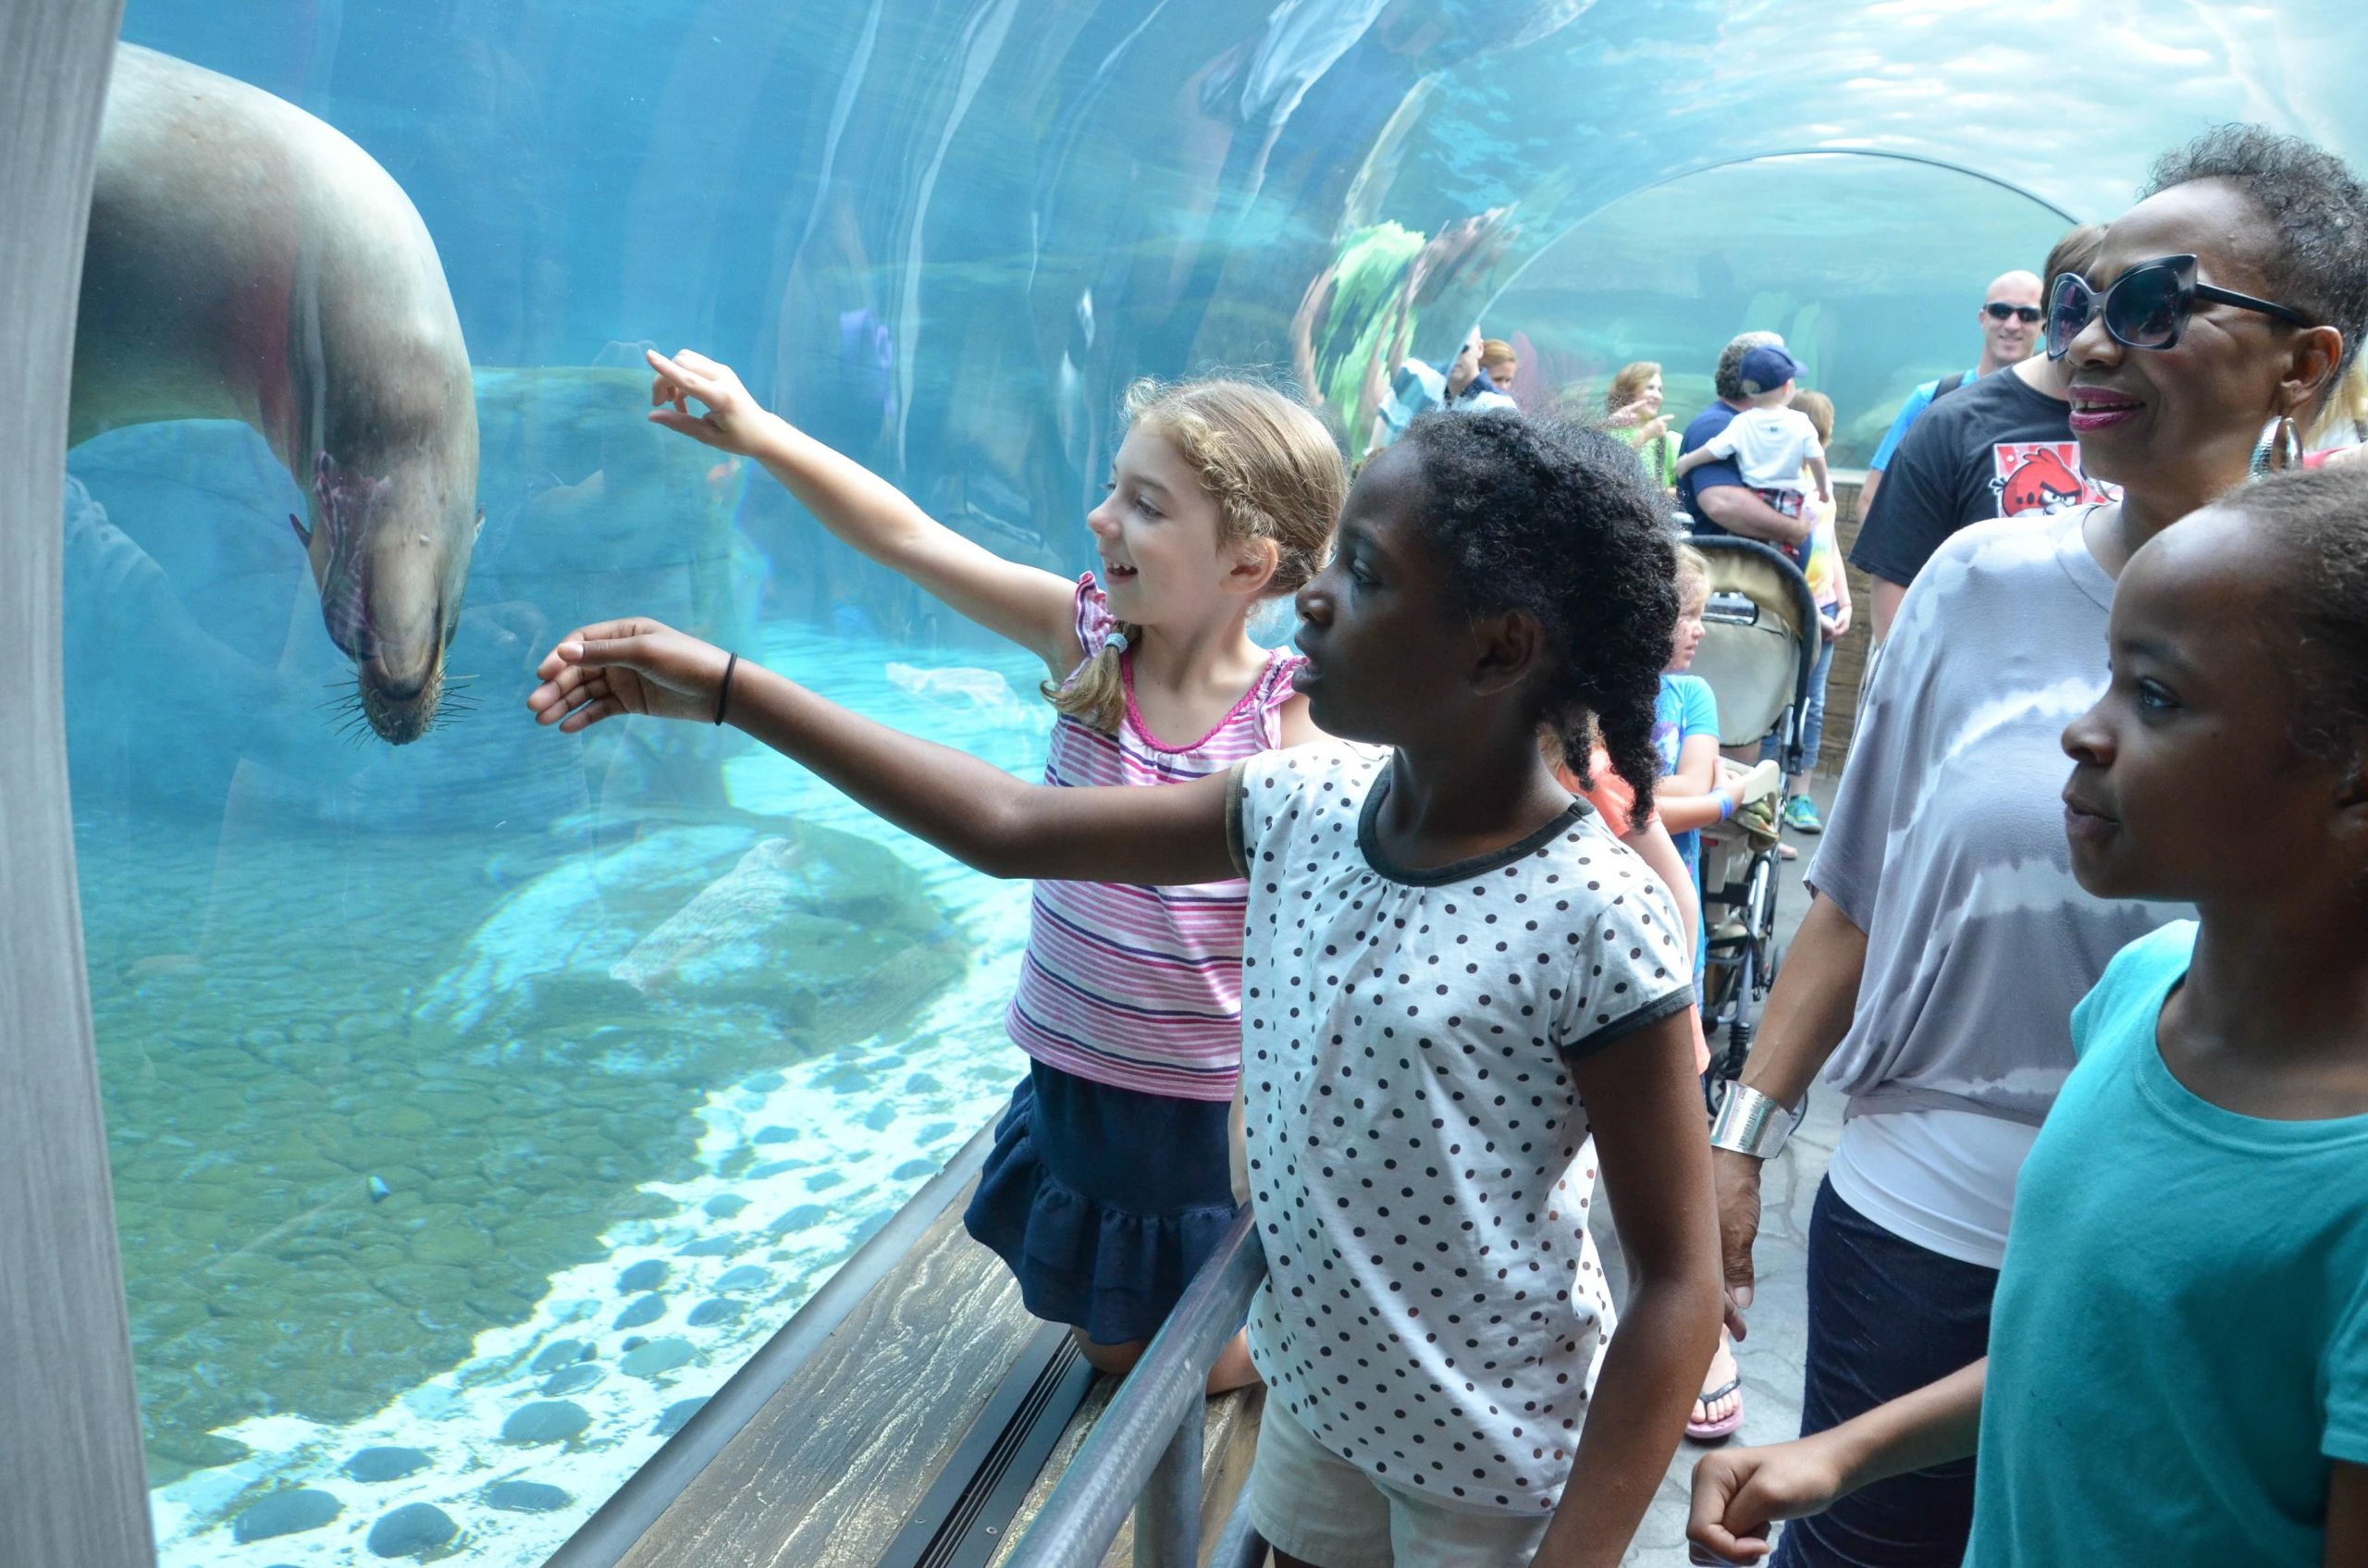 The St. Louis Zoo is home to 14,000 animals and is one of the free world-class zoos.